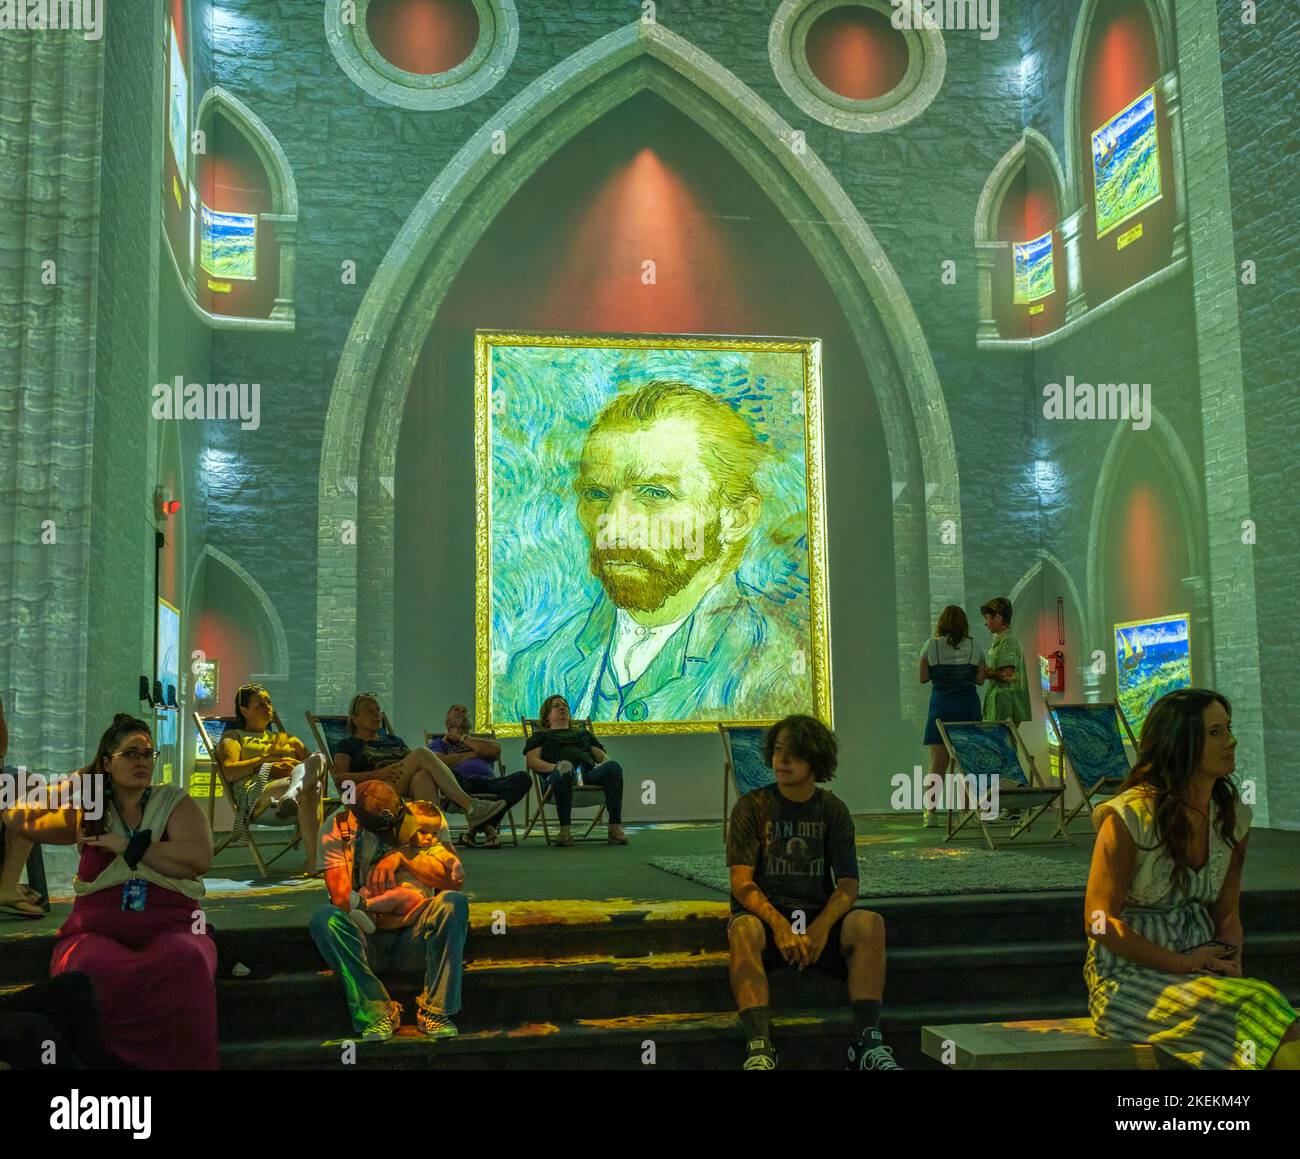 New Orleans, Louisiana, USA - May 15, 2022: Vincent Van Gogh s self-portrait and a crowd at the Immersive Vincent Van Gogh Experience Stock Photo